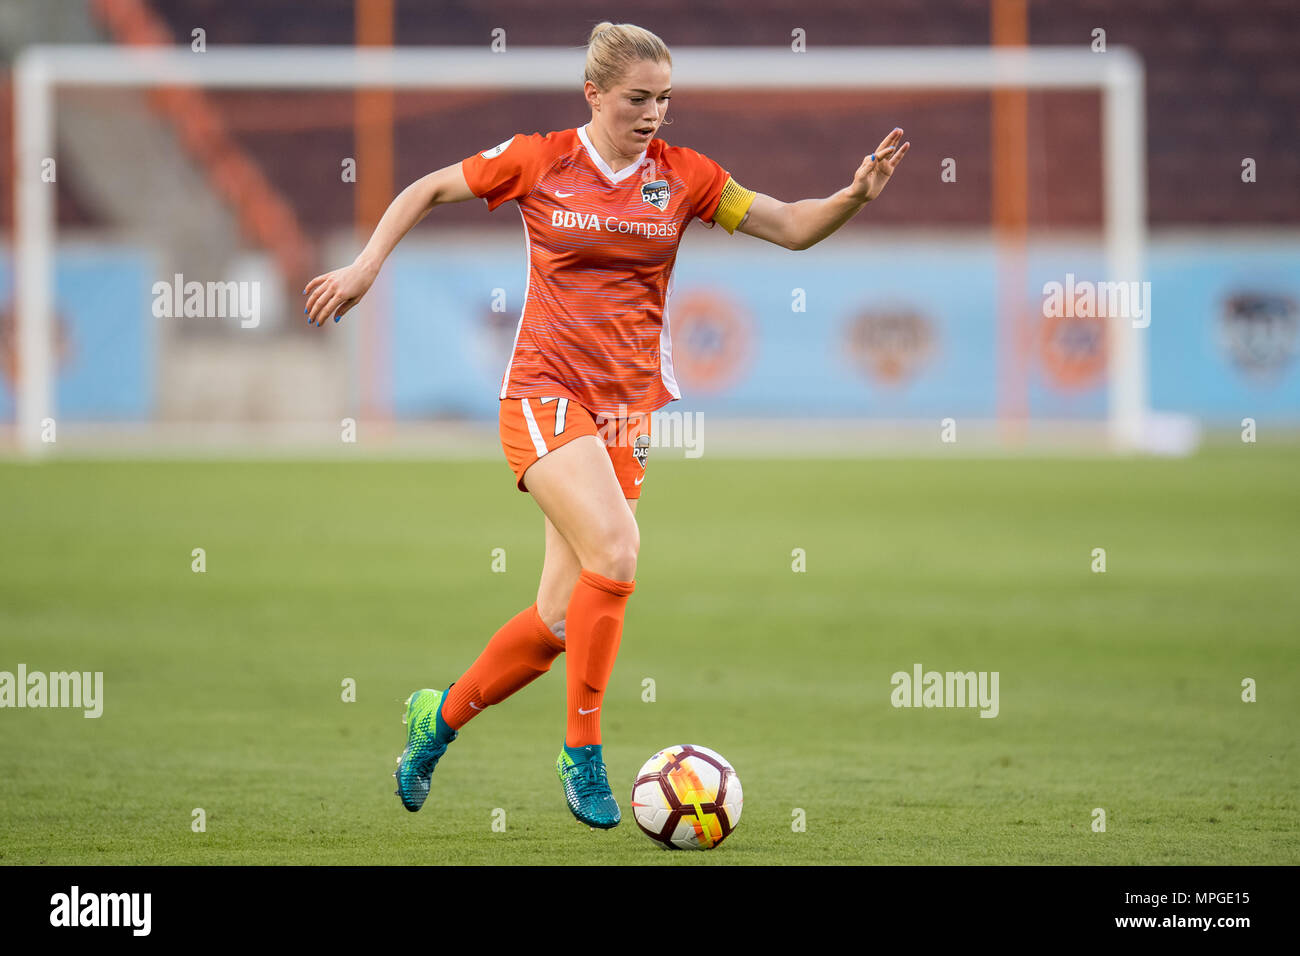 Houston, TX, USA. 23rd May, 2018. Houston Dash forward Kealia Ohai (7) controls the ball during a NWSL soccer match between the Houston Dash and the Seattle Reign at BBVA Compass Stadium in Houston, TX. The Dash won 2 to 1.Trask Smith/CSM/Alamy Live News Stock Photo